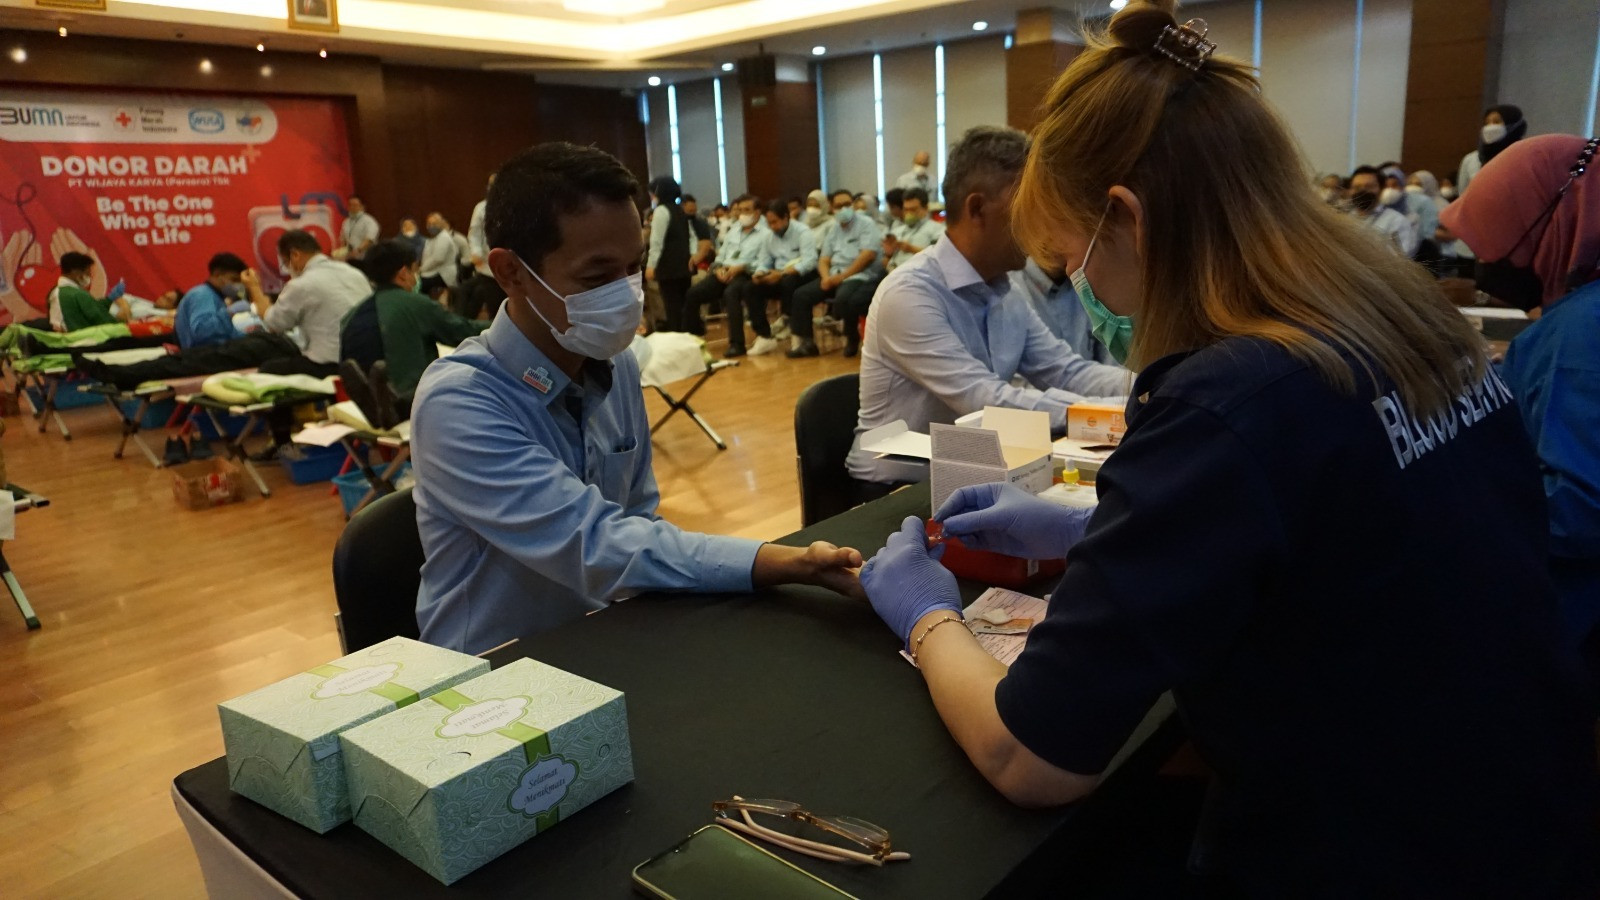 SDonating 2,942 Blood Bags in 4 Years, WIKA Receives Appreciation from the Indonesian Red Cross Image